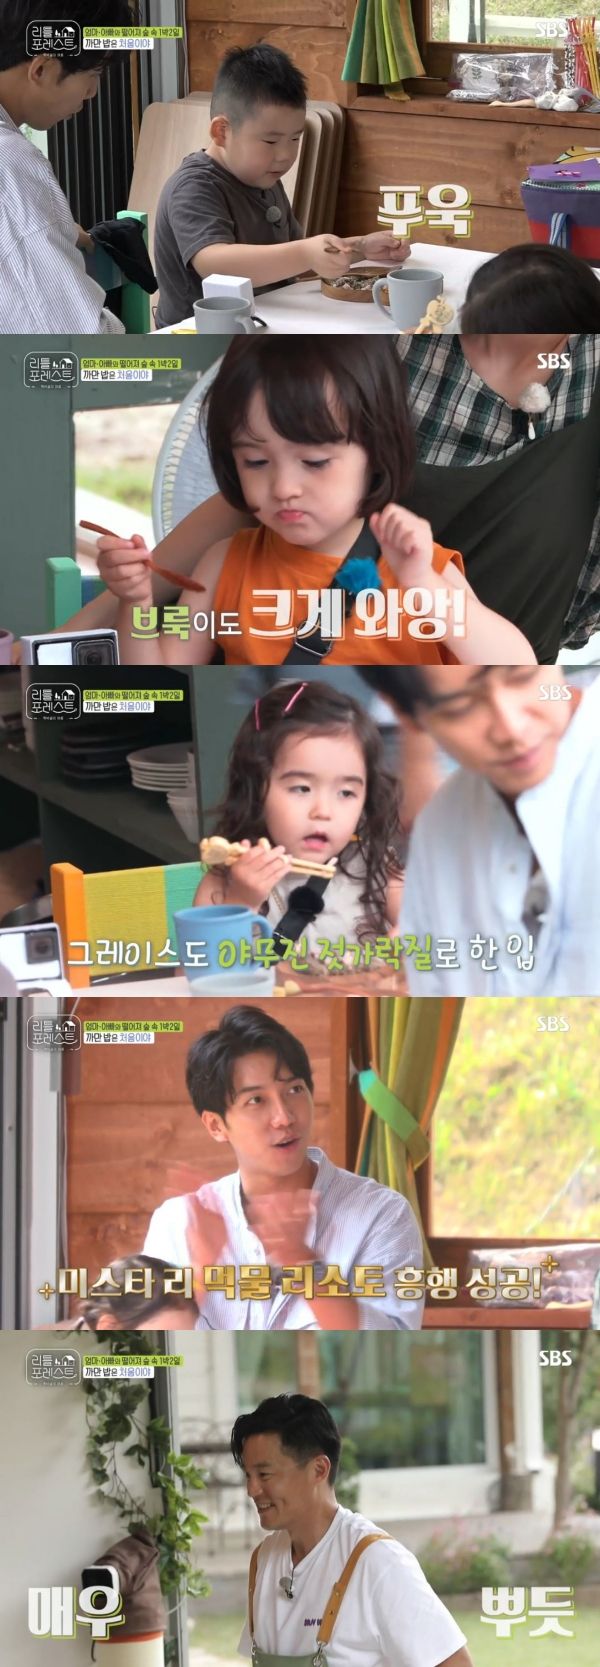 The children who saw black rice showed curiosity.SBS Little Forest broadcasted on the 9th included Park Na-rae, Lee Seo-jin, Lee Seung-gi and Jung So-min, who left the forest for one night and two days with their children.On the day of the broadcast, the four people who prepared the squid ink risotto watched the children eat.When the children asked, Why is rice black? With curious eyes on black rice, Park Na-rae explained, The squid ink has entered the rice.Gaon asked, What is squid ink? And Lee added a pure answer, It comes from the bottom of the bottom, the hip.Its poo from the mouth and it comes with black water, its squid ink, Park Na-rae calmly explained once again.Lee Seo-jin and Lee Seung-gi helped to avoid eating because they encouraged them to eat well when they showed a delicious eating of the squid that they did not like.Park Na-rae then challenged to create an Ice cream with his children.Lee, who saw Park Na-rae putting ice and salt in the ball, said, Its cold, but Park Na-rae explained that it makes the ice colder.Ice cream, which was completed by the children after pouring milk, was strawberry and banana Ice cream. The satisfied children made milk beard and fell into Ice cream trilogy.As the sun began to set, the children moved into the mountains for Camping, leaving the muddy children behind, Lee Seo-jin and Lee Seung-gi set up a Tent installation.Lee Seung-gis nails left Lee Seo-jin with his backrest and out towards the children, with Park Na-rae helping install the Tent.Children who had a good time in the installed Tent.Lee Seung-gi, who saw this, said, It is not just convenient toward Park Na-rae, and he was interested in the Tent installed in 30 minutes than the tree house that took two weeks.Lee Seung-gi turned on the lights of the tree house to attract childrens interest and had a good time as the wind.In front of the campfire as the sun set, Lee Seung-gi opened the lid of a fan full of Popcorn.Brooke was interested in Popcorn, which splashed everywhere, saying, I wanted to eat Popcorn.The children, who sat in a row with Jung So-min, grabbed and inhaled Popcorn with both hands, and Lee Seo-jin and Lee Seung-gi looked at it with joy.However, their Popcorn Sammaegyeong also briefly followed the praise of Lee Hans meat, and Park Na-rae and Lee Seo-jin started preparing for the meal immediately and laughed.On the other hand, Lee Seo-jin was sweating as the children on the chairs fell as promised during the camp.Lee Seo-jin started repairing, but the children fell in turn, and eventually all six chairs were repaired and attracted attention.